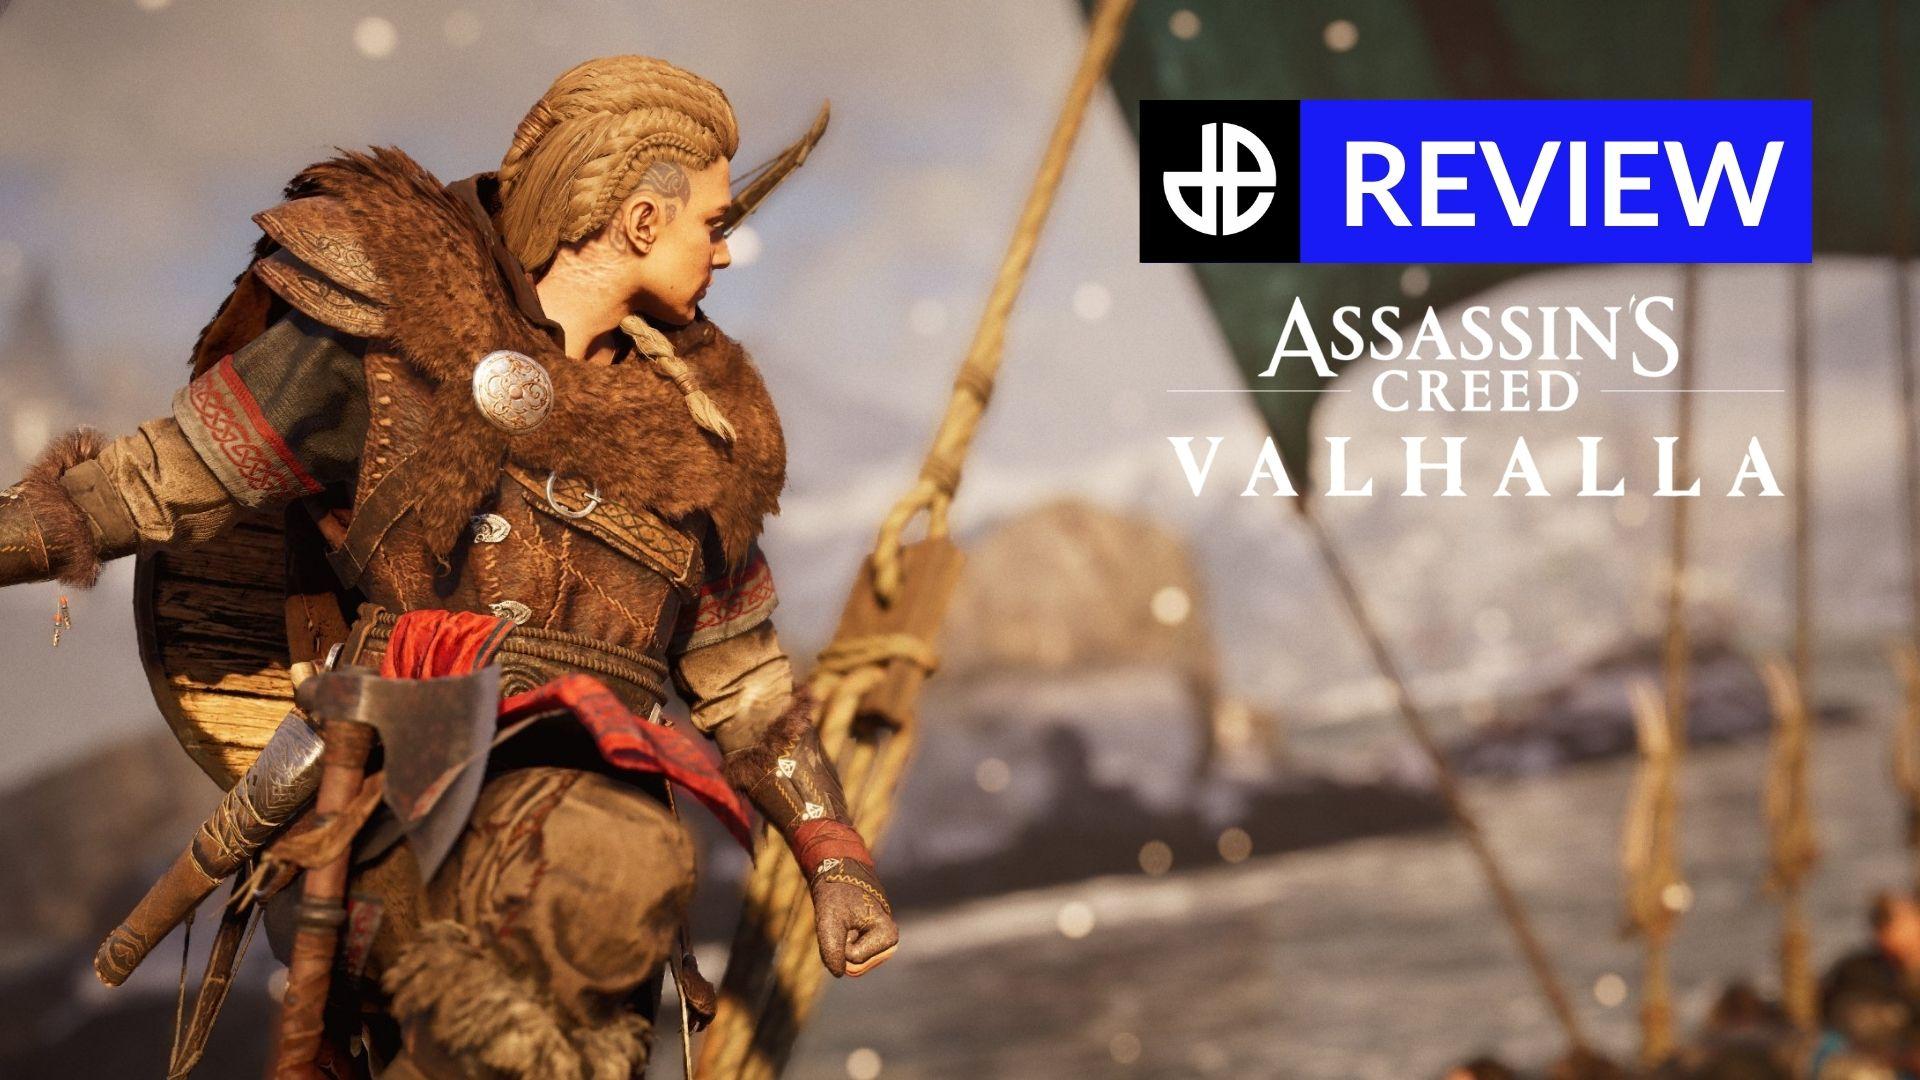 Lounge review, 'Assassin's Creed: Valhalla' is a 100-hour game worth your  time and money